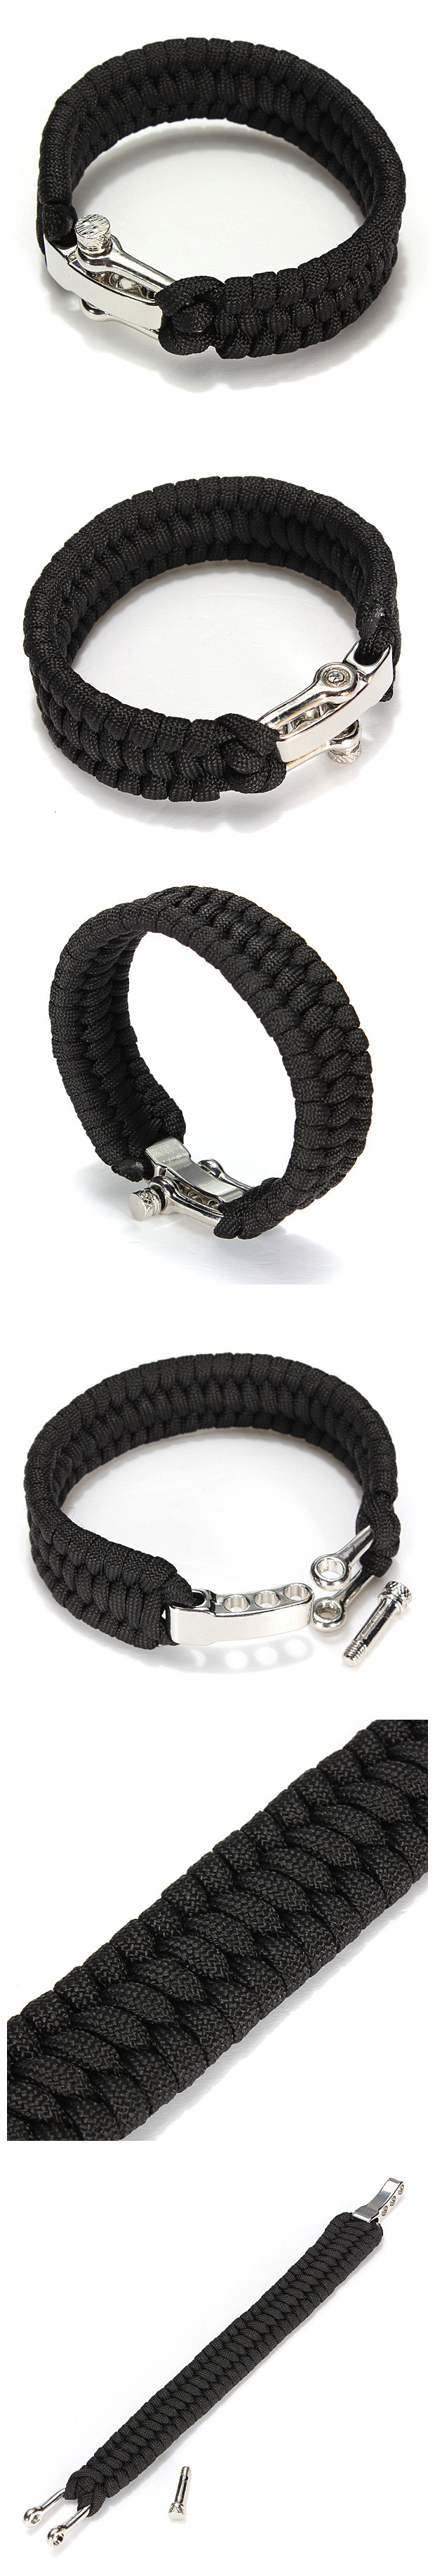 7-Strands-ParaCord-Bracelet-String-Cord-Hand-Ring-With-Quick-Release-Shackle-Buckle-For-Survival-80636-3